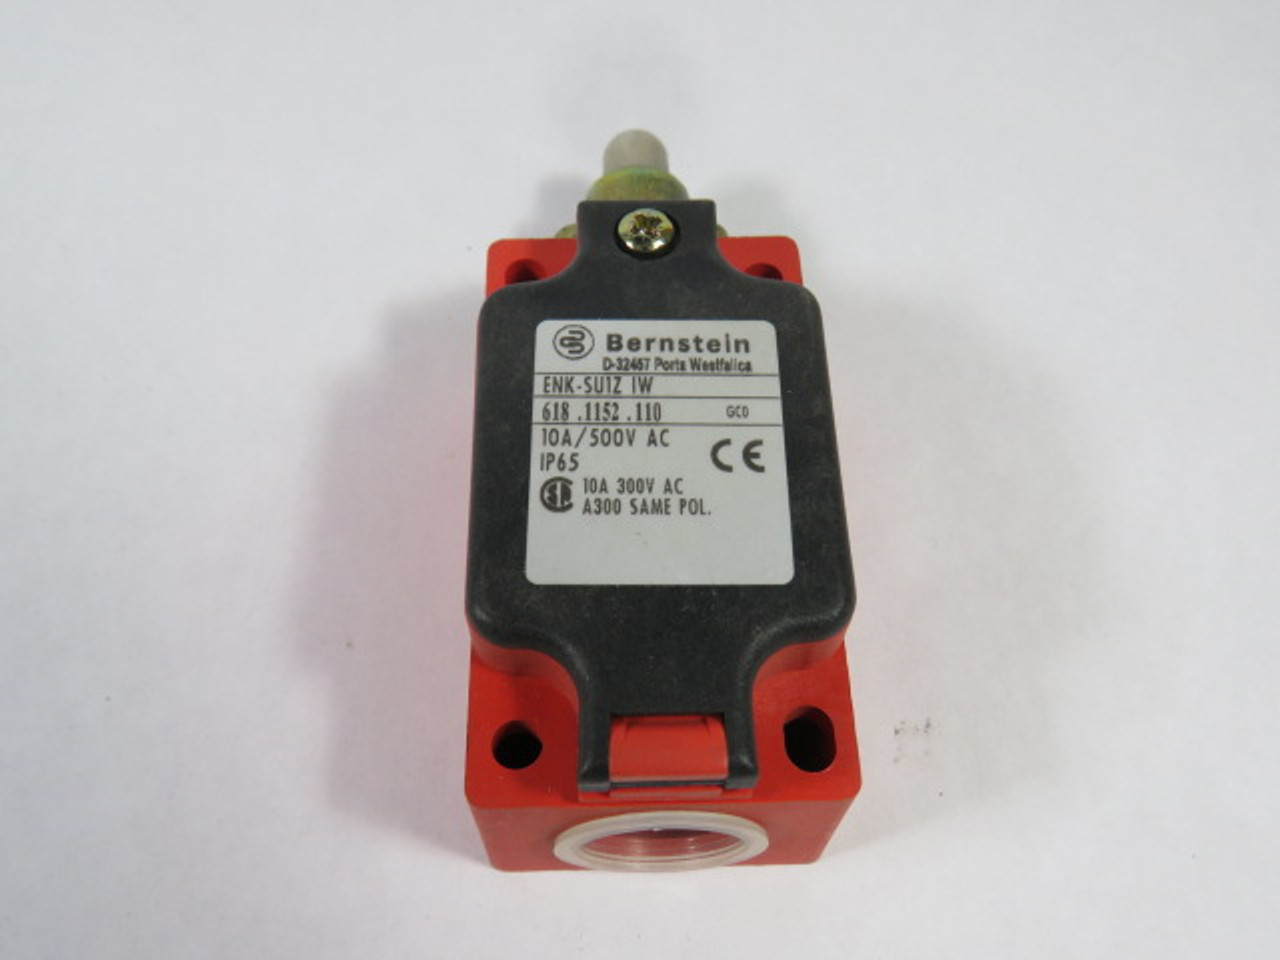 Warner Electric 618-1152-110 Limit Switch 1NO 1NC 10A 500V ! NEW !